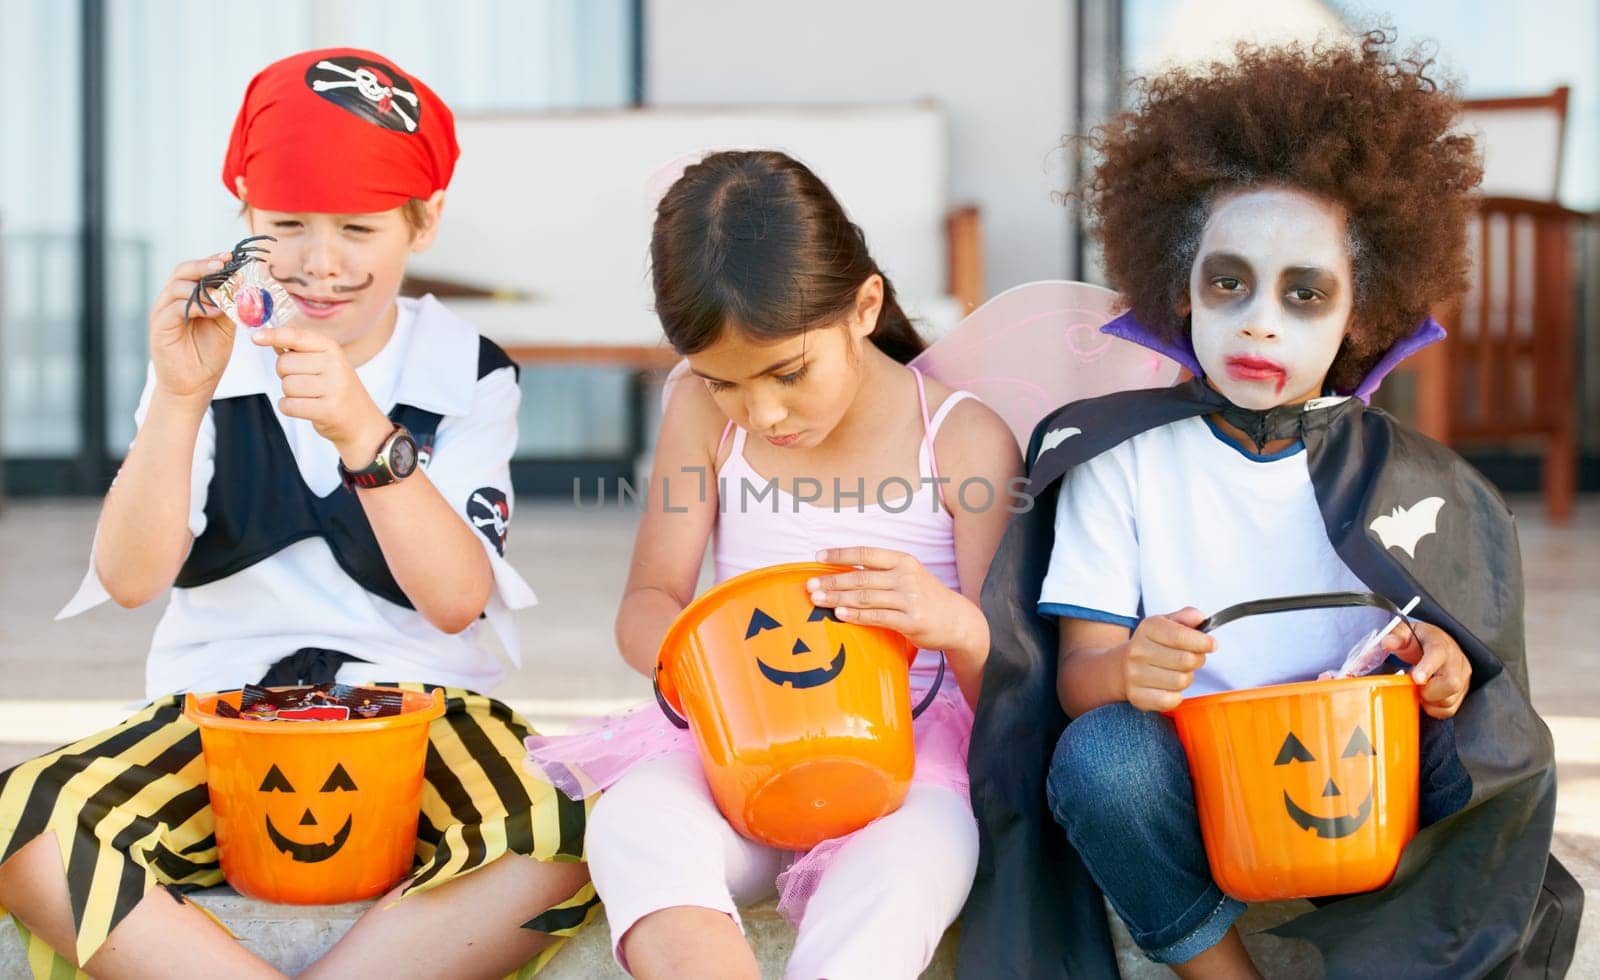 Children, halloween and candy bucket for holiday fun or vampire dress up, fairy or pirate role play. Friends, group and pumpkin basket as dessert or trick or treat celebration, fantasy or development.